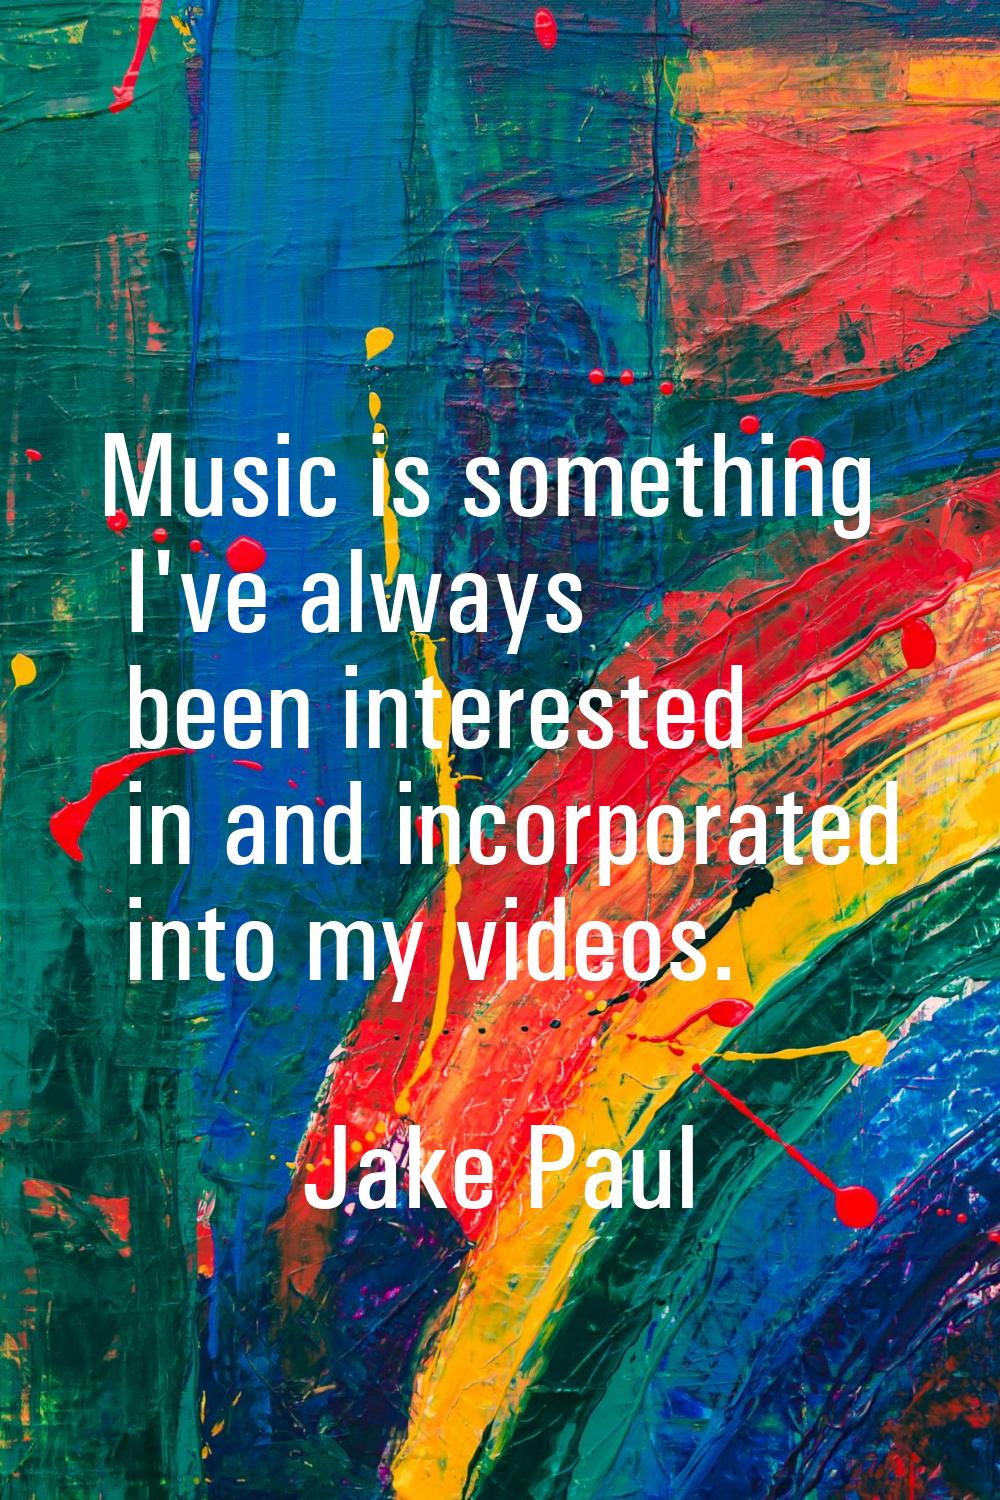 Music is something I've always been interested in and incorporated into my videos.